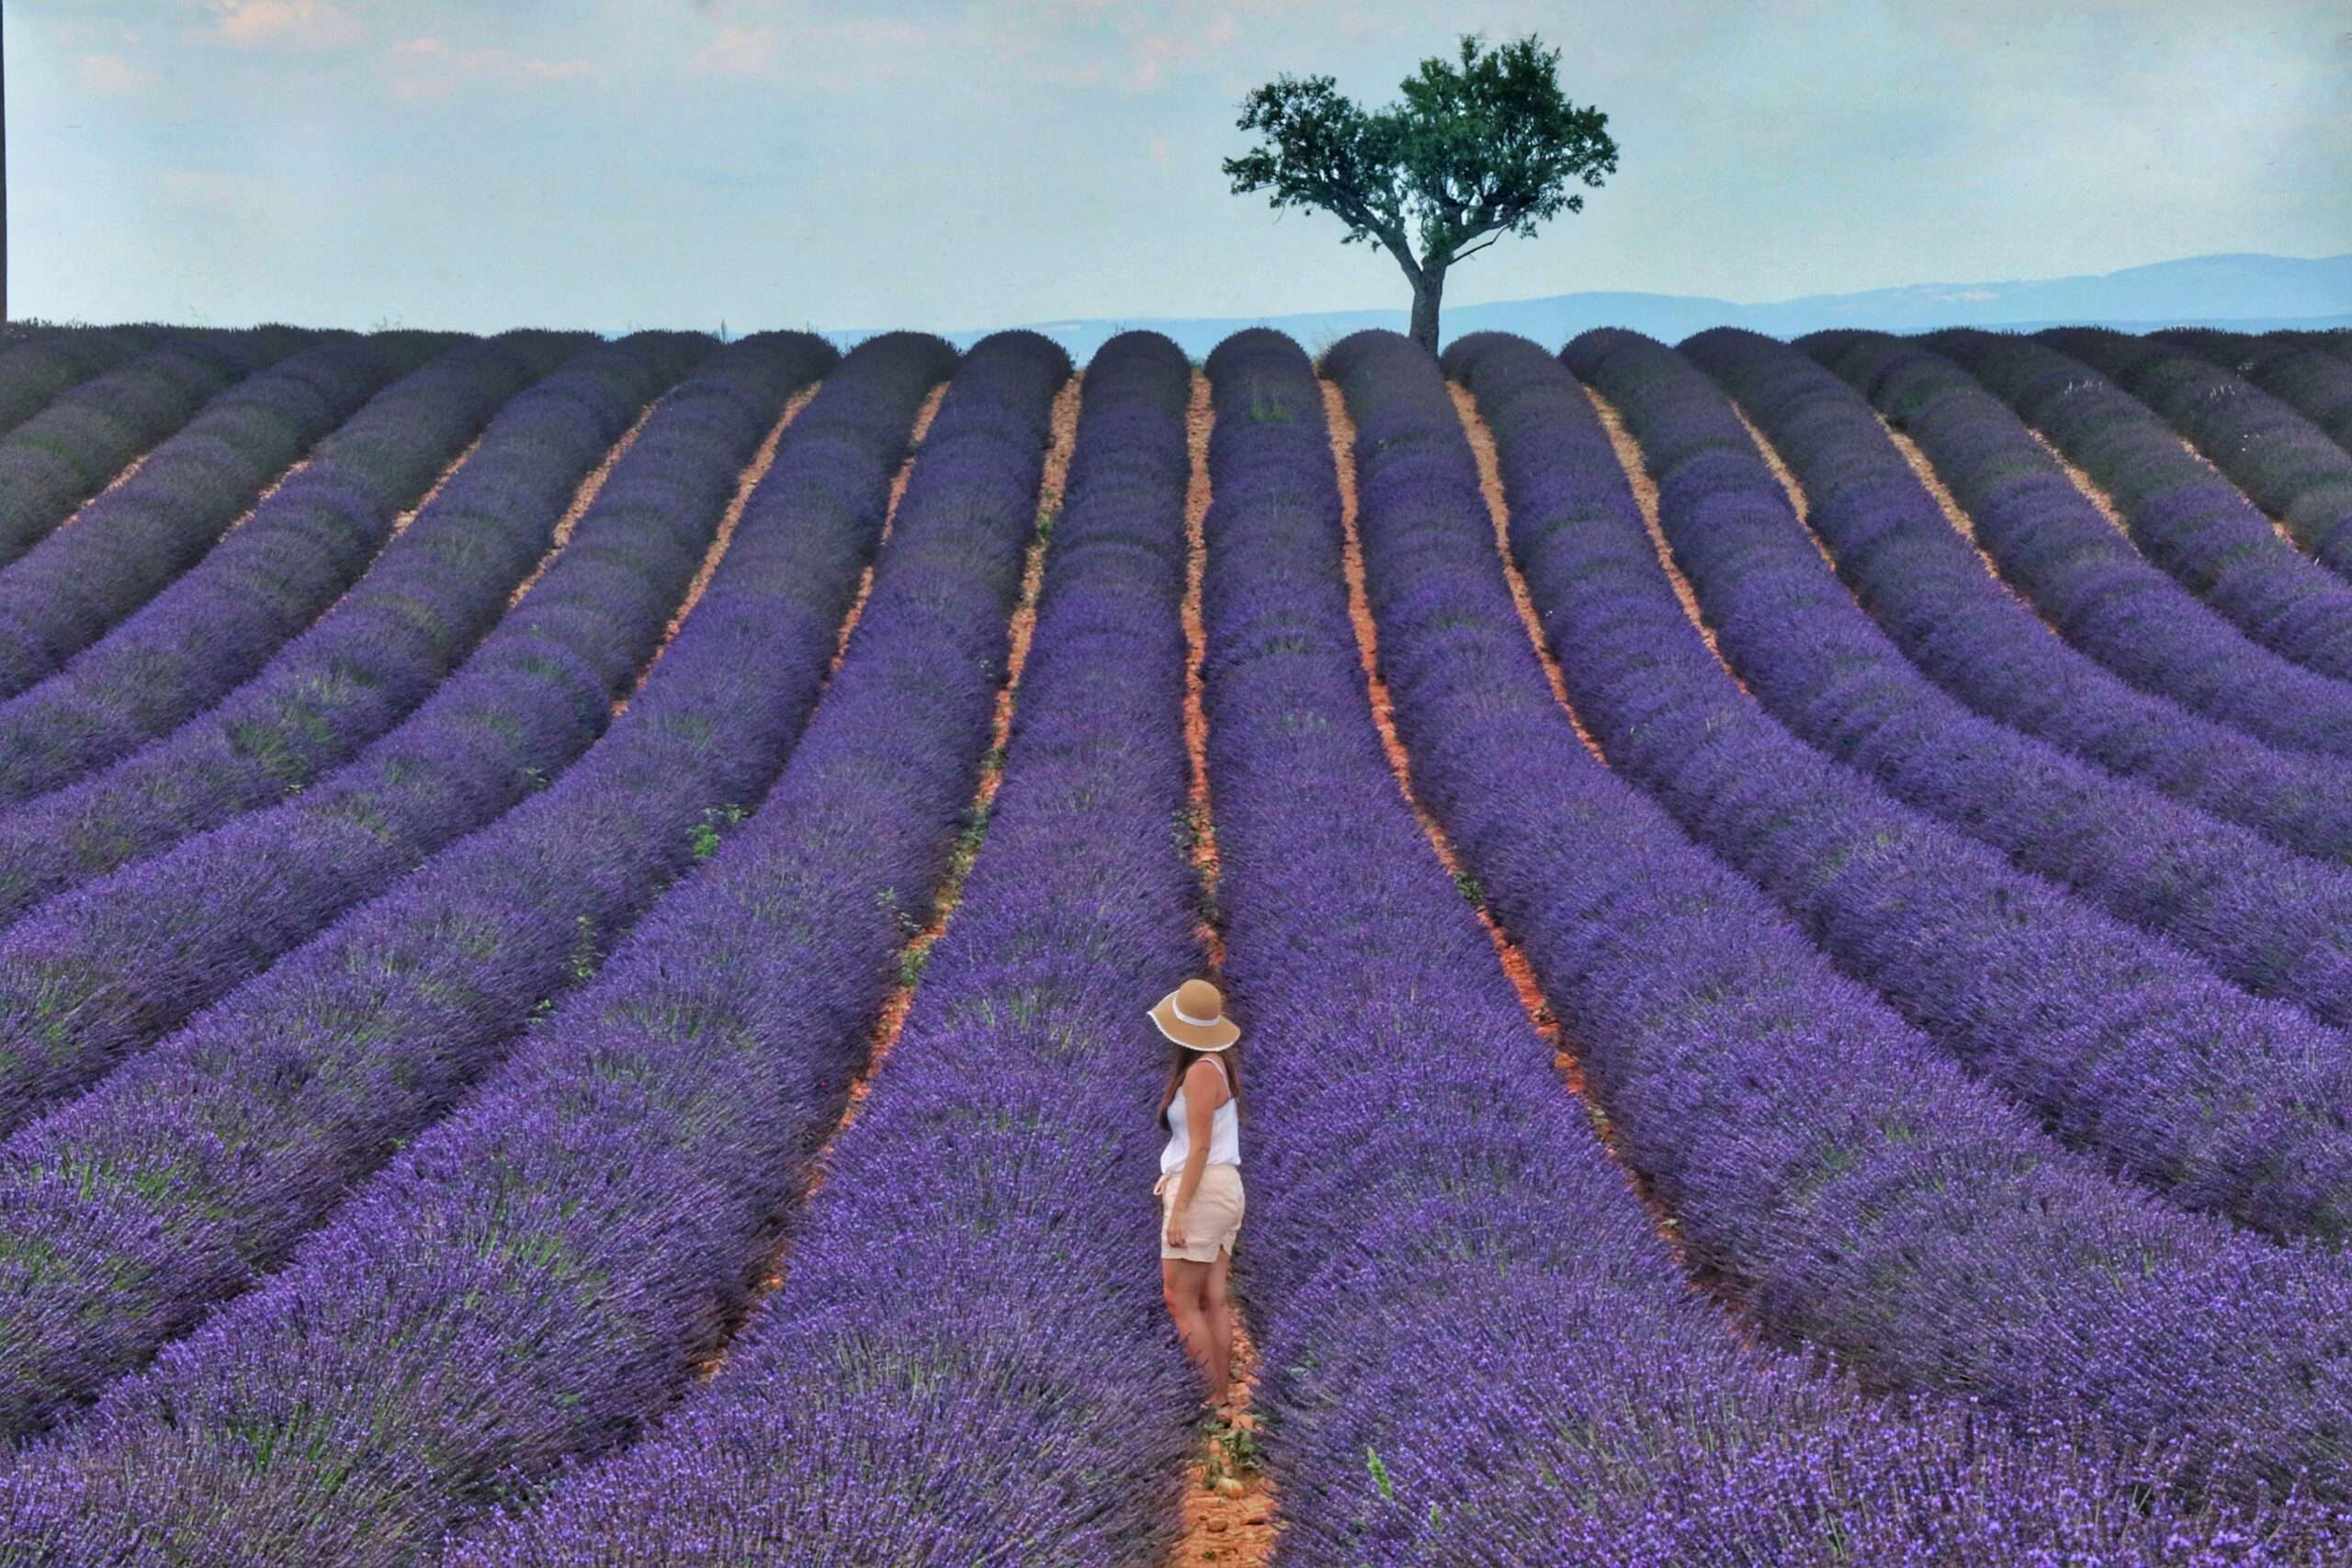 Woman walking through a path between rows of purple flowers